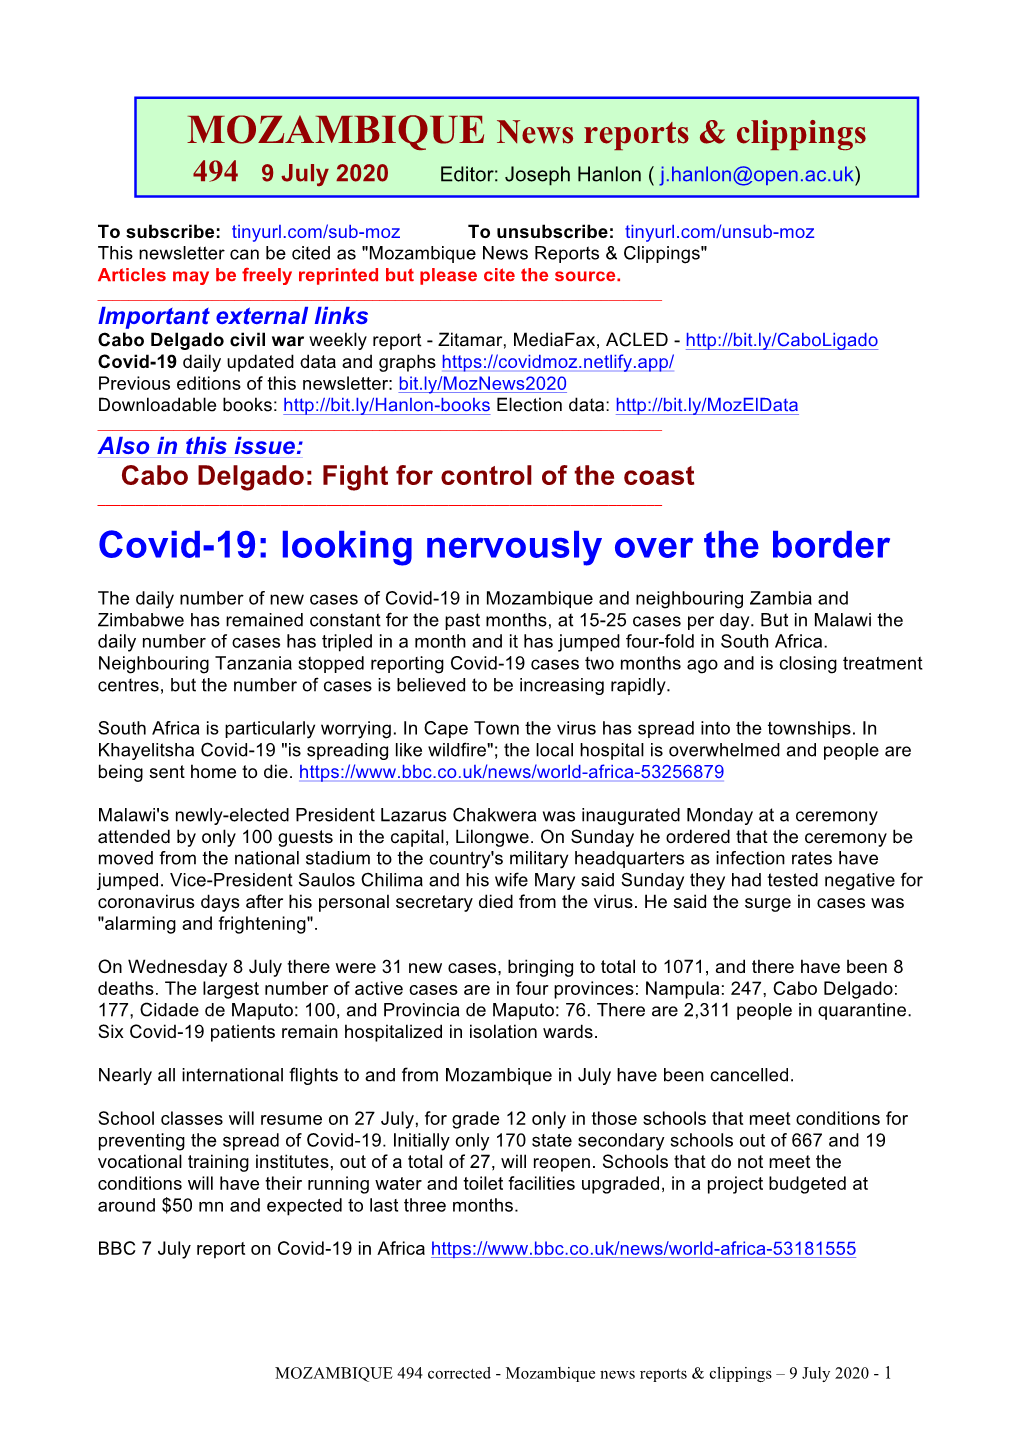 Covid-19: Looking Nervously Over the Border